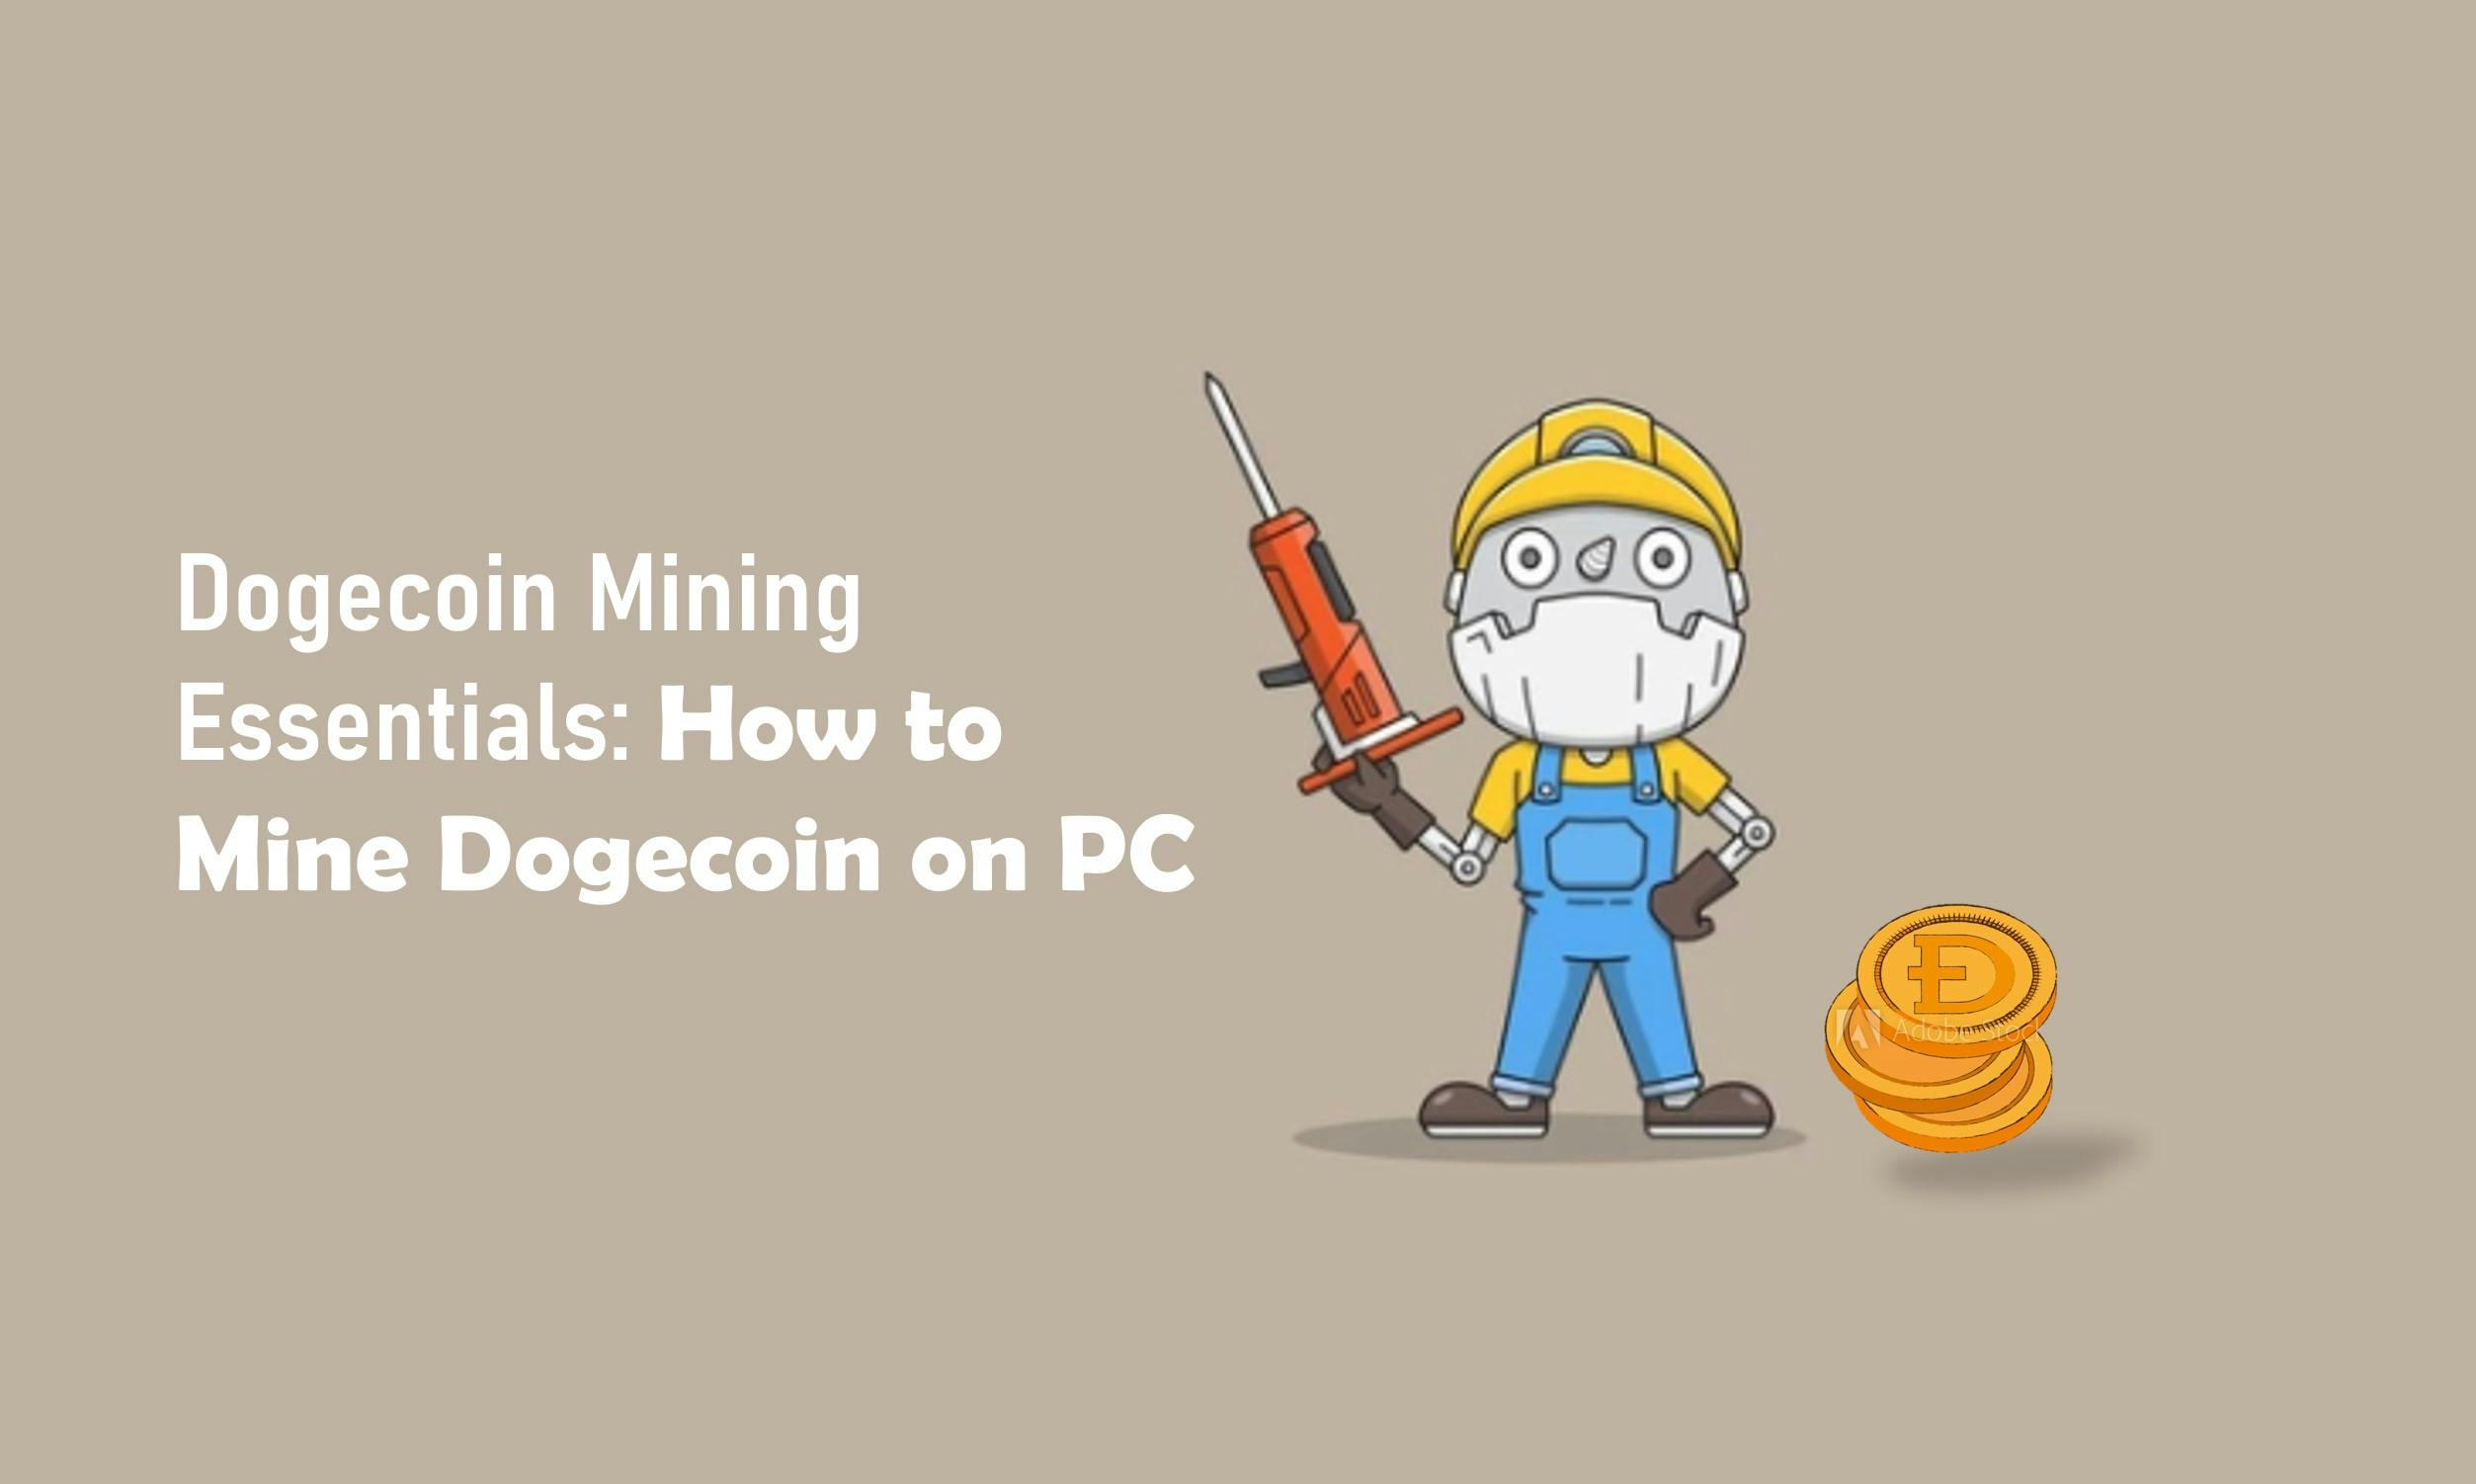 Dogecoin Mining Essentials: How to Mine Dogecoin on PC